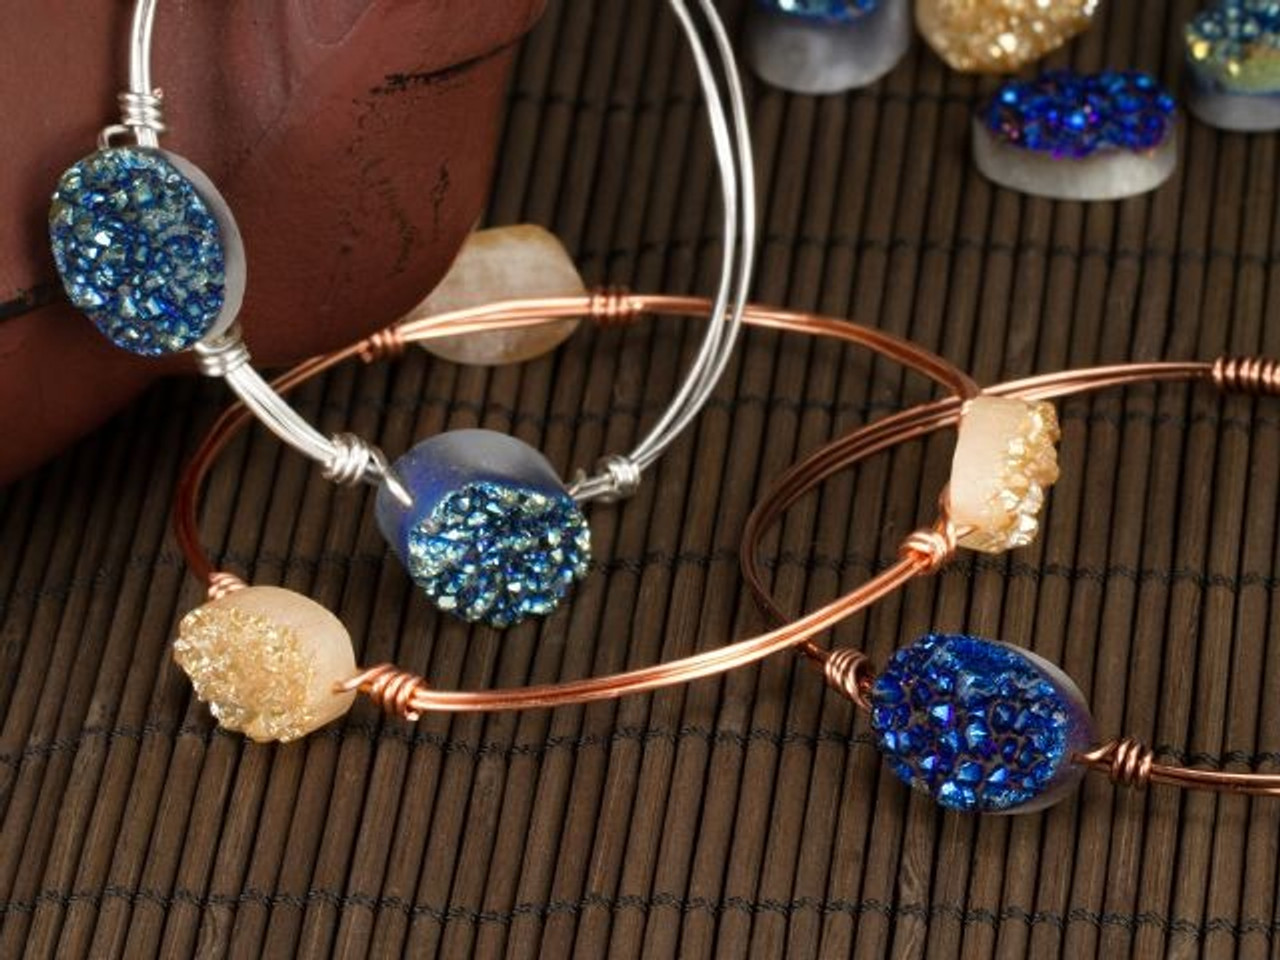 DIY Gemstone Wire Wrapped Bracelet * Moms and Crafters